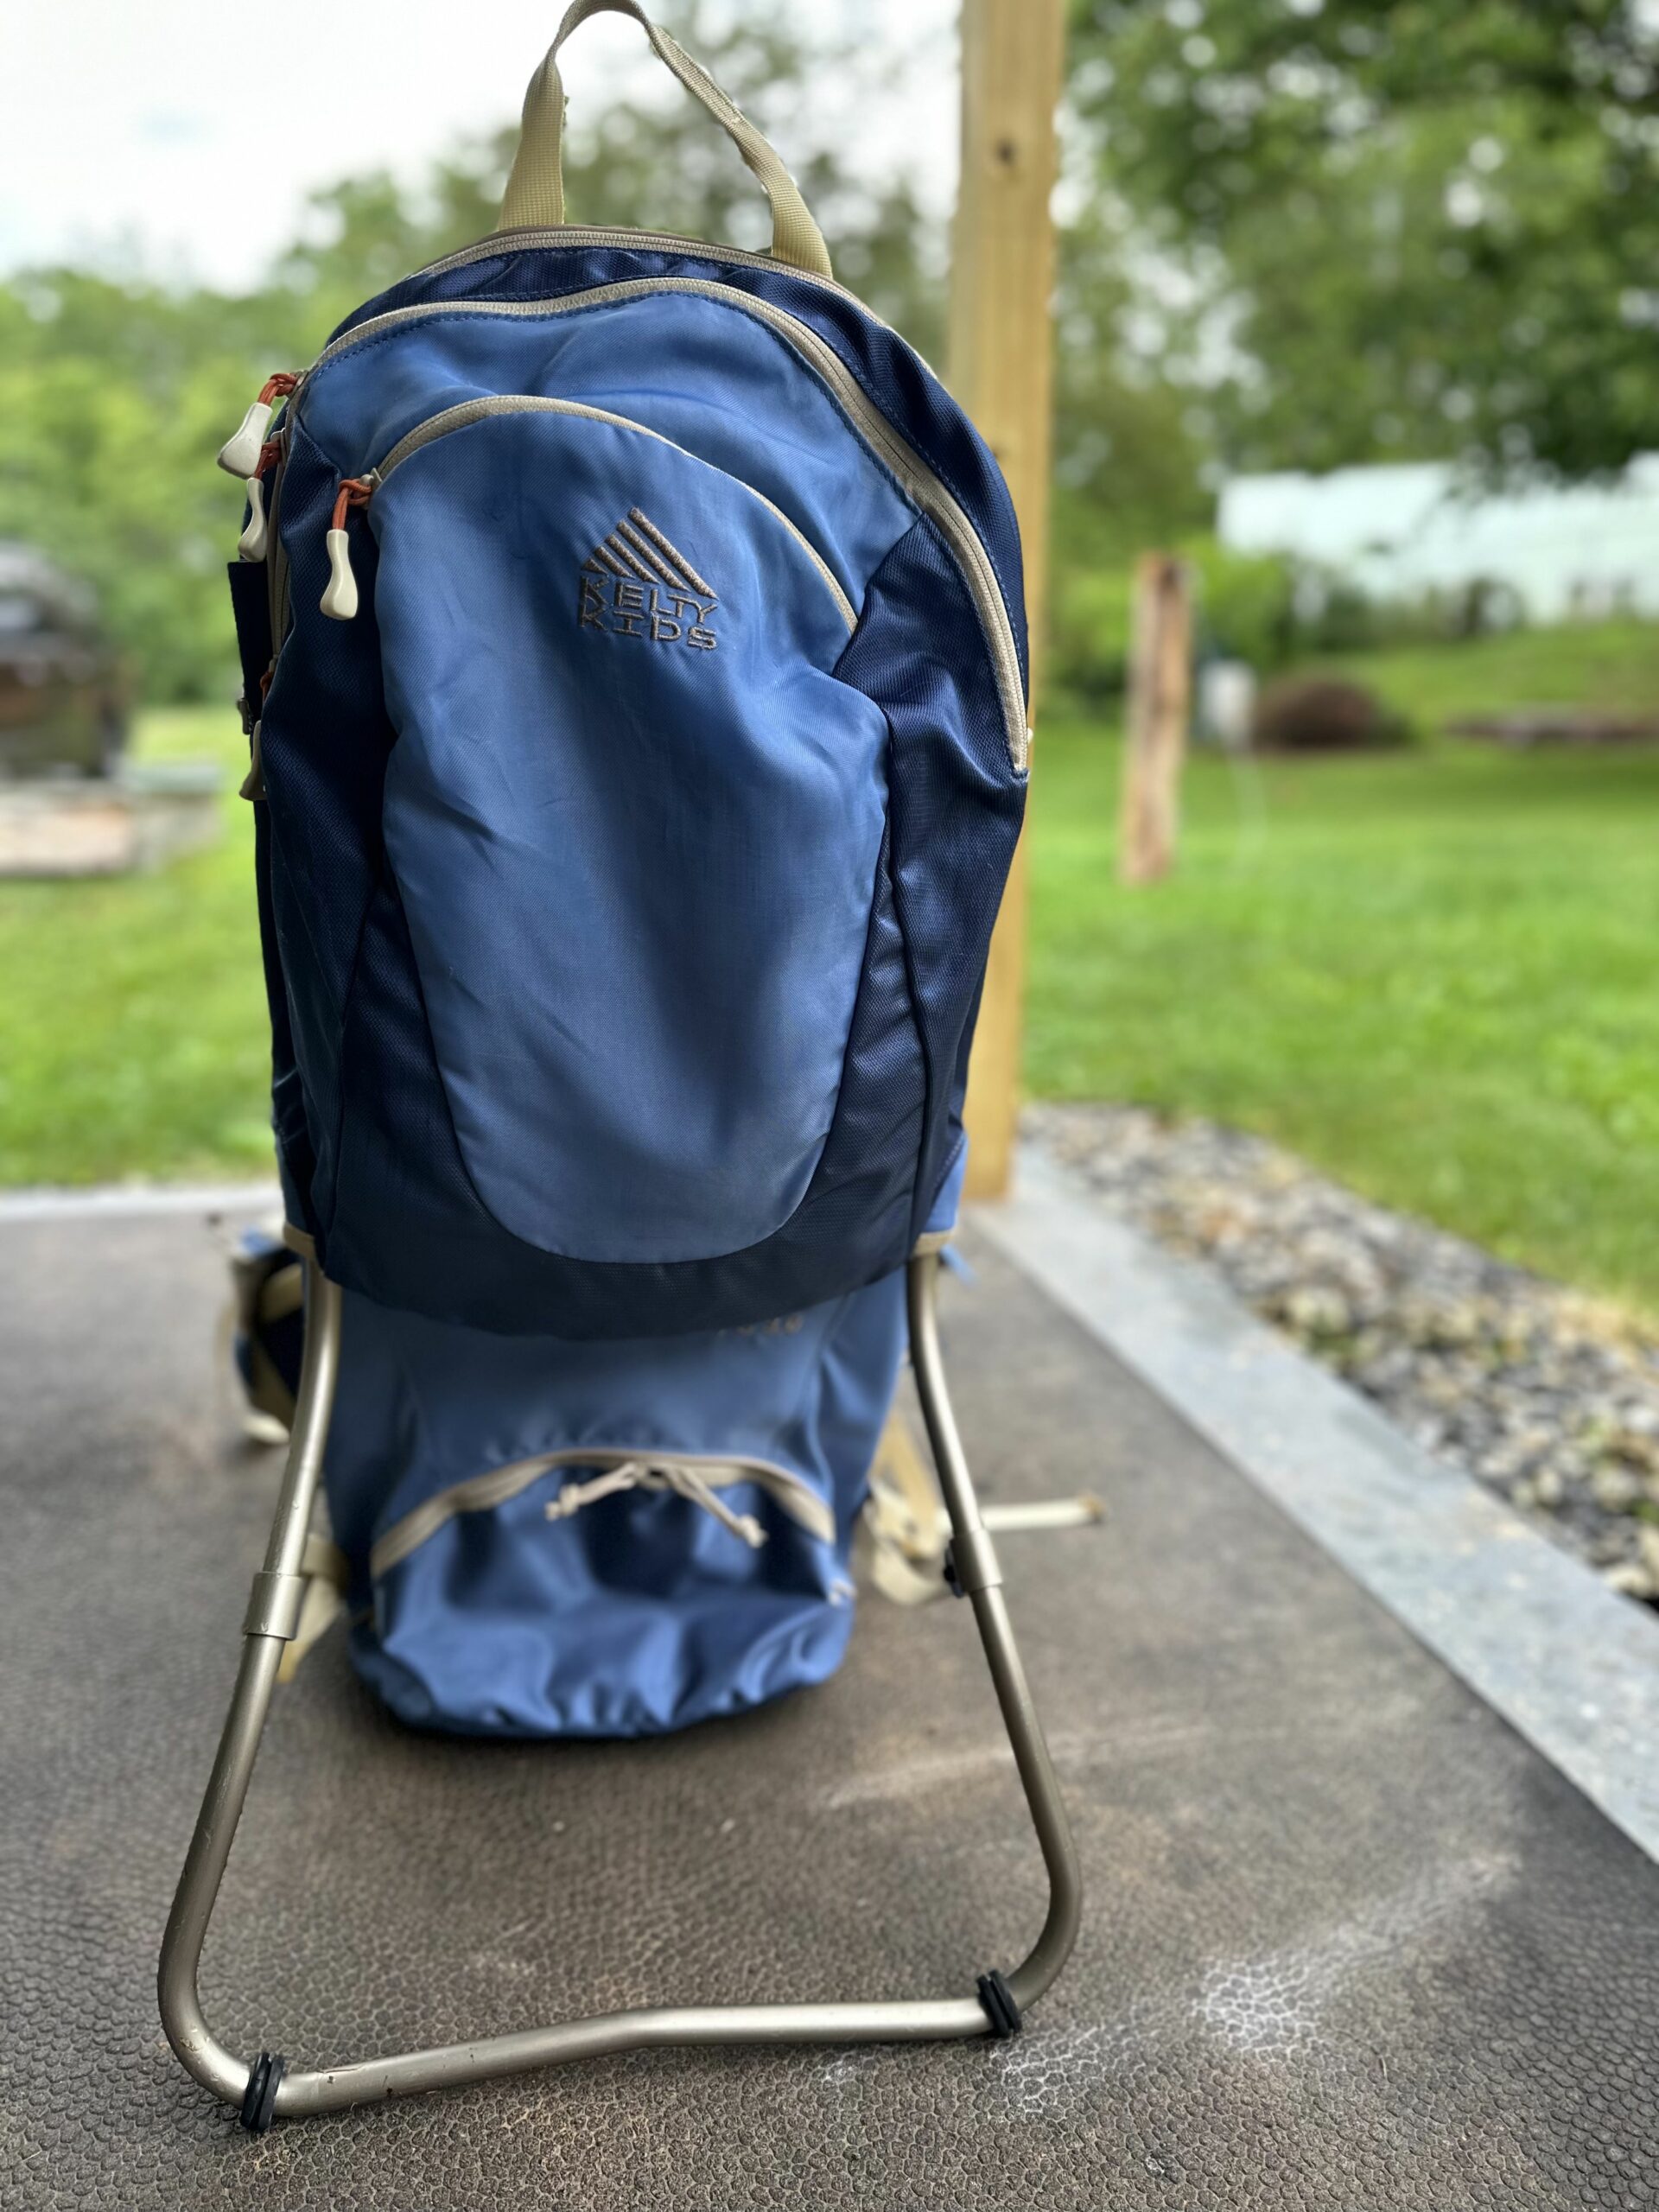 Front facing view of the Kelty FC 3.0 Carrier in Blue and Tan